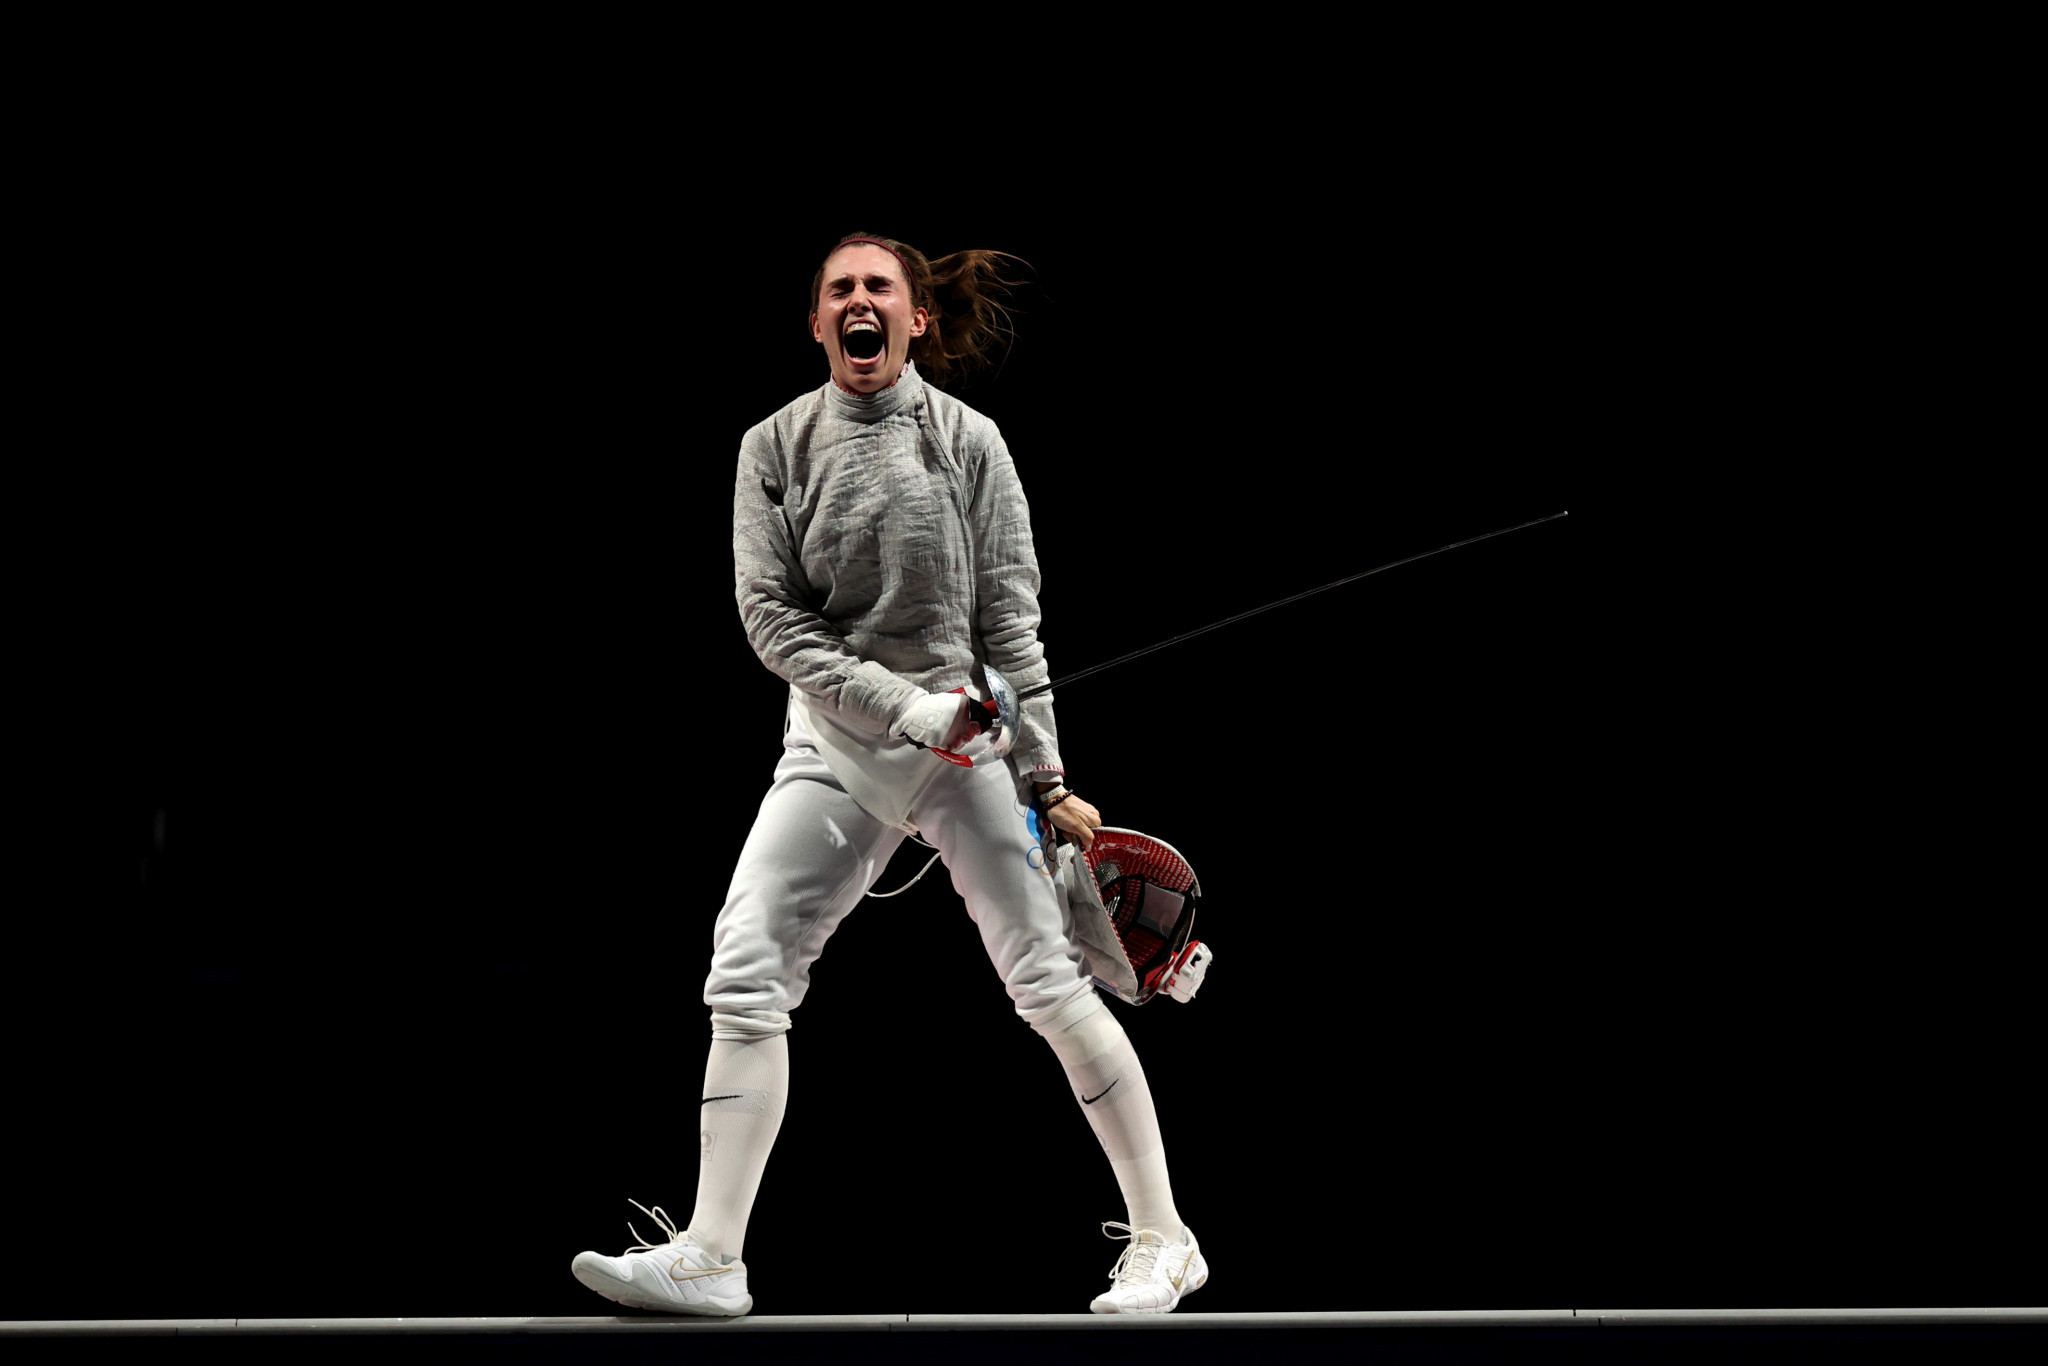 Women's sabre Olympic champion Sofia Pozdniakova is among the Russian fencers blocked from FIE competitions ©Getty Images